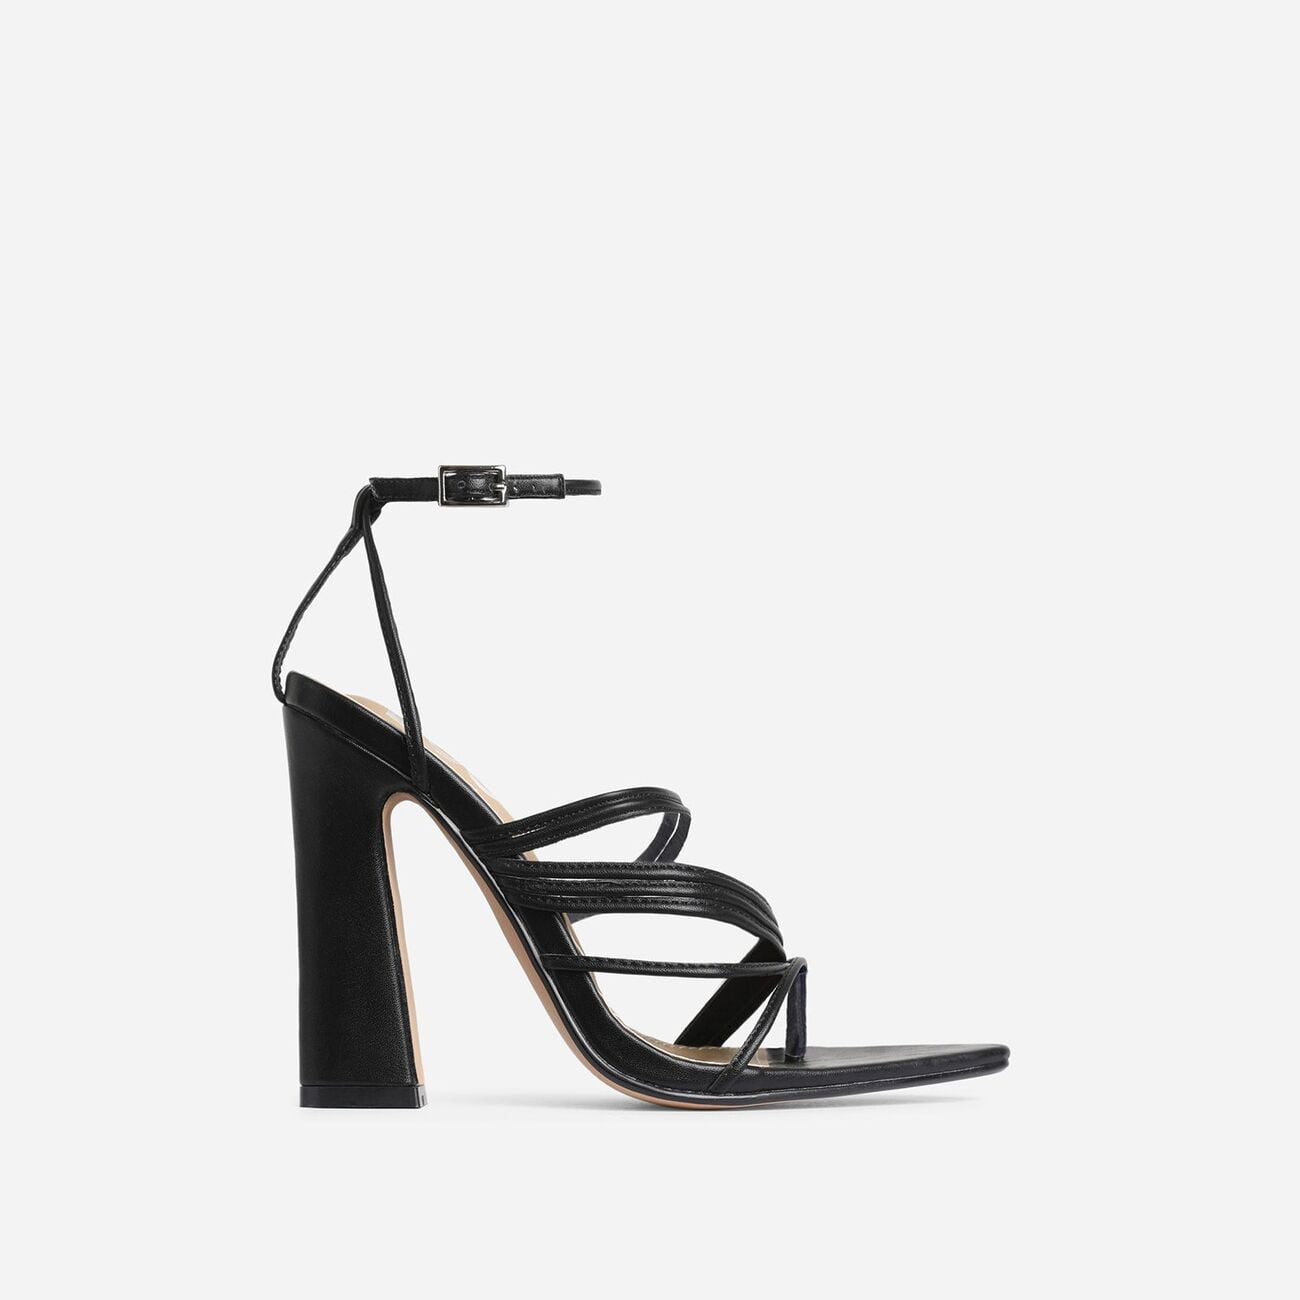 Viki Black Suede Pointed-Toe Ankle Strap Pumps | Ankle strap pumps, Ankle  strap heels, Heels